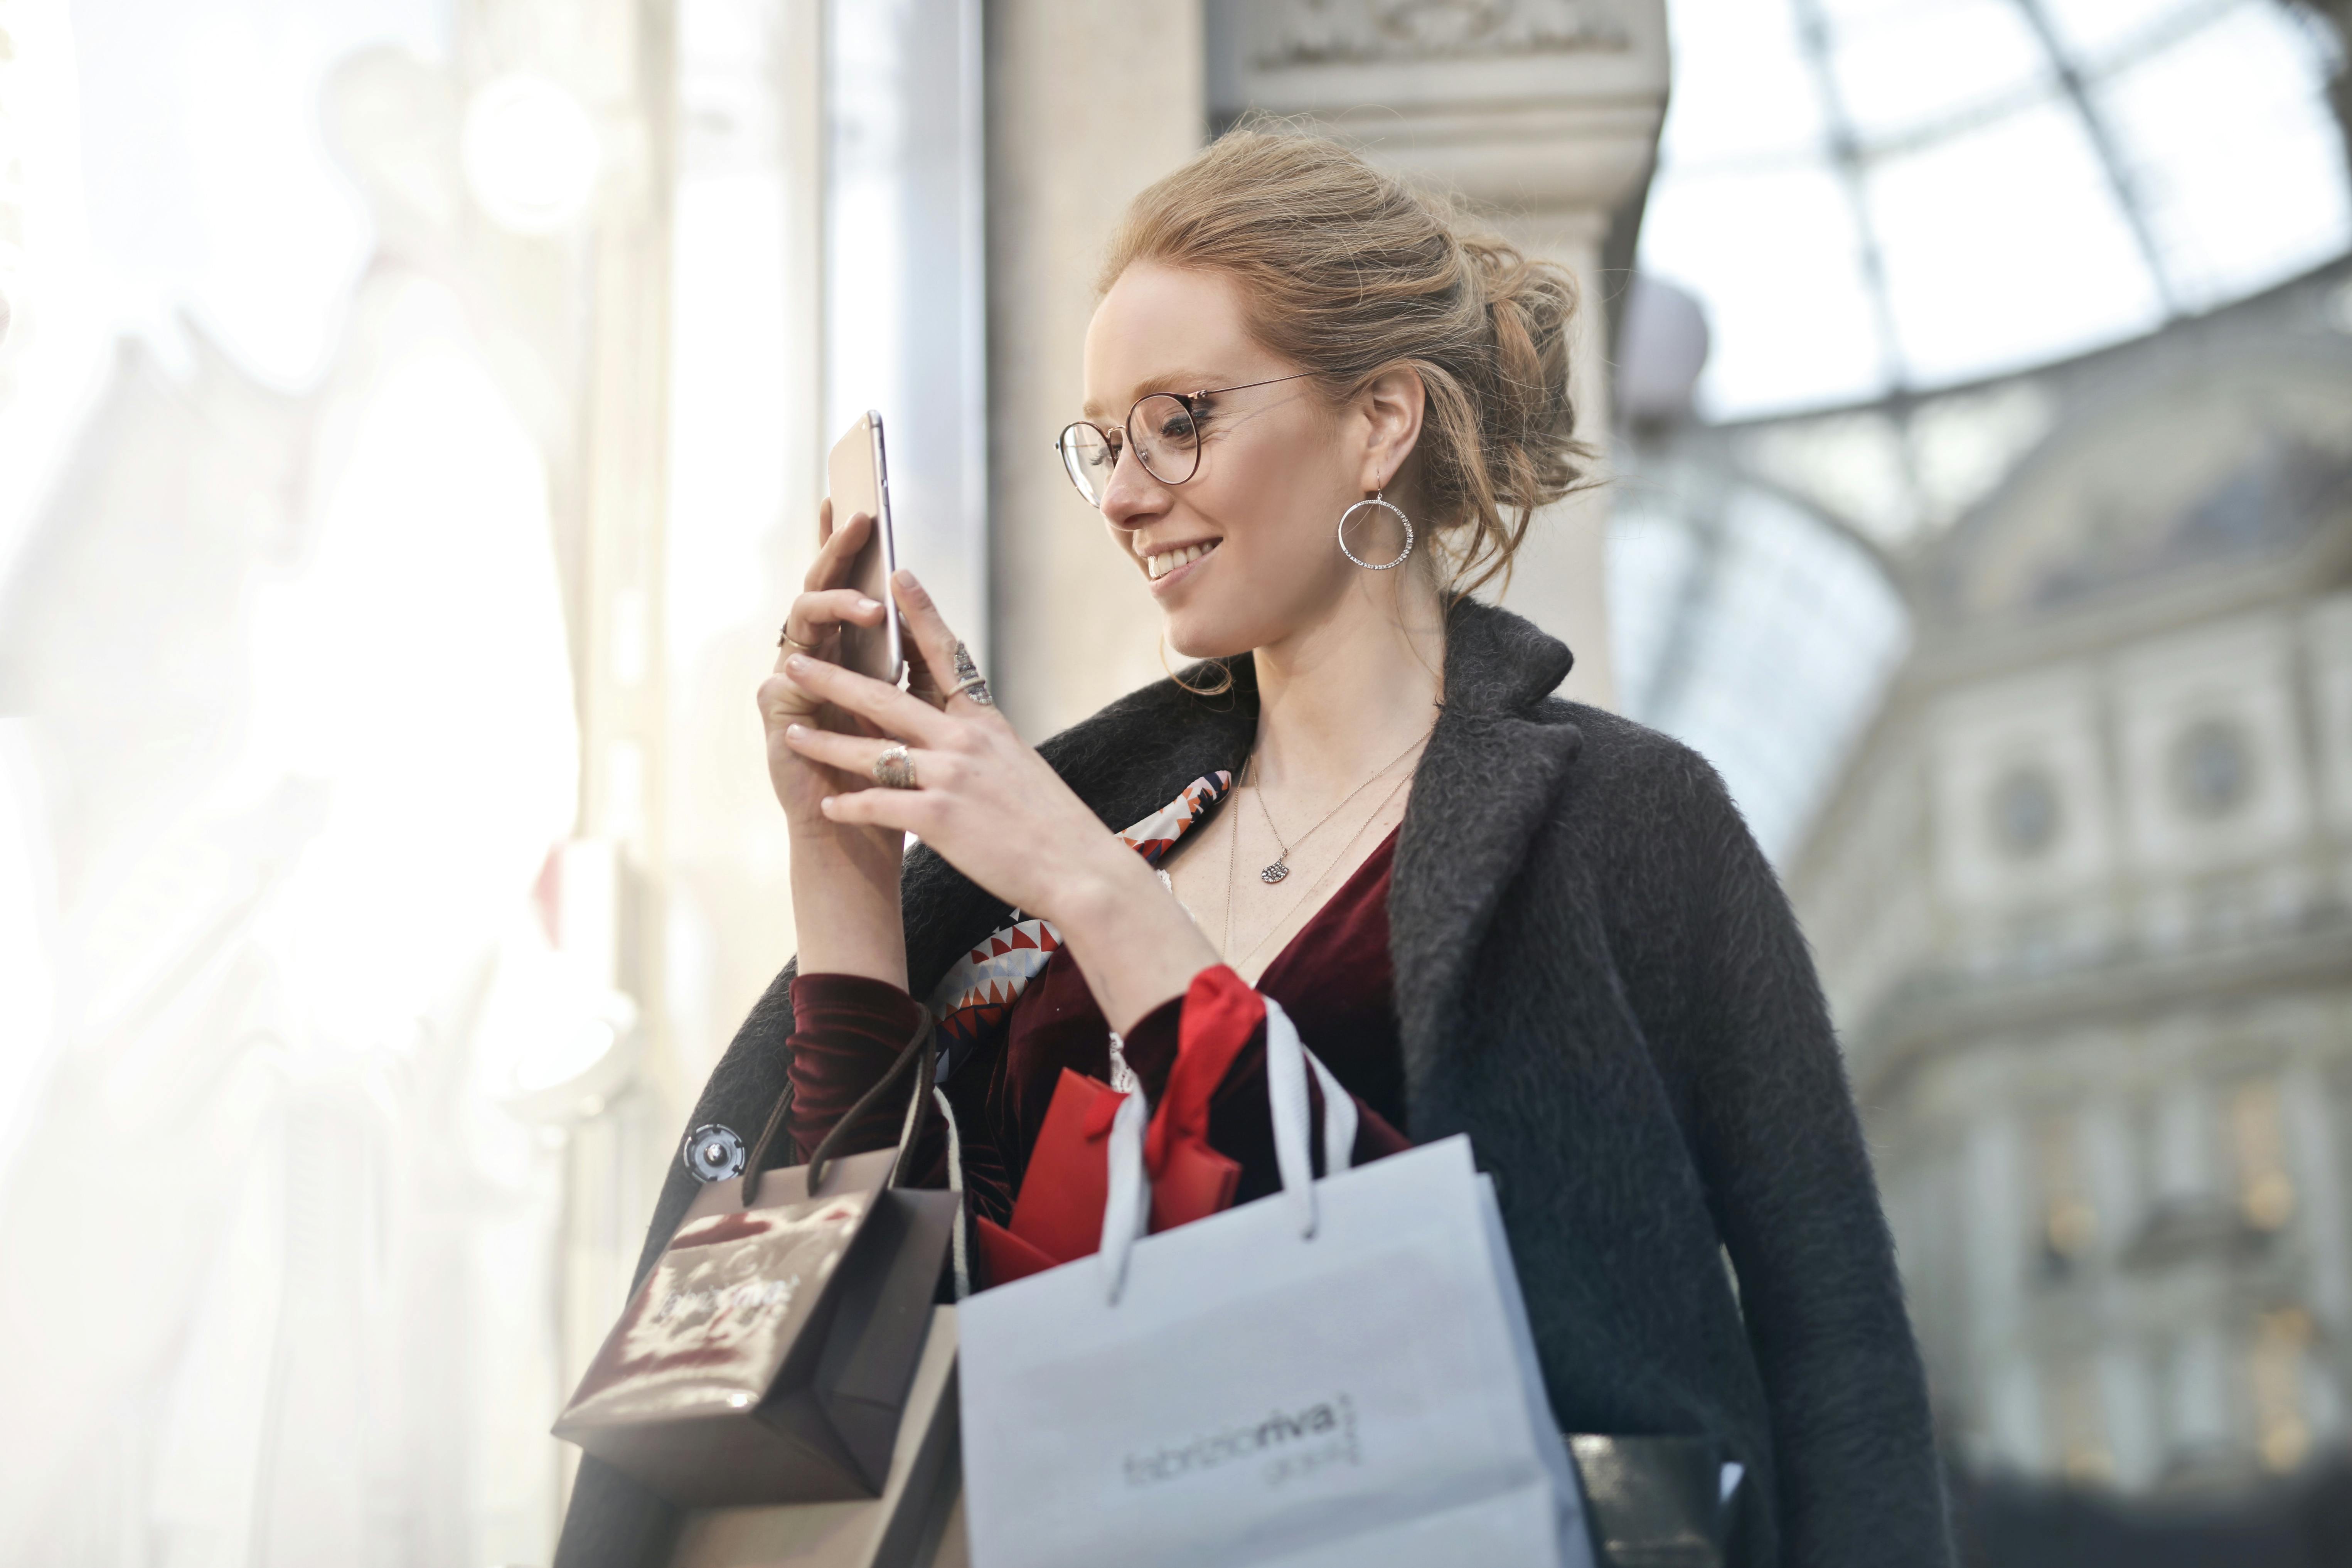 A woman smiling while holding several shopping bags while using at her phone | Source: Pexels